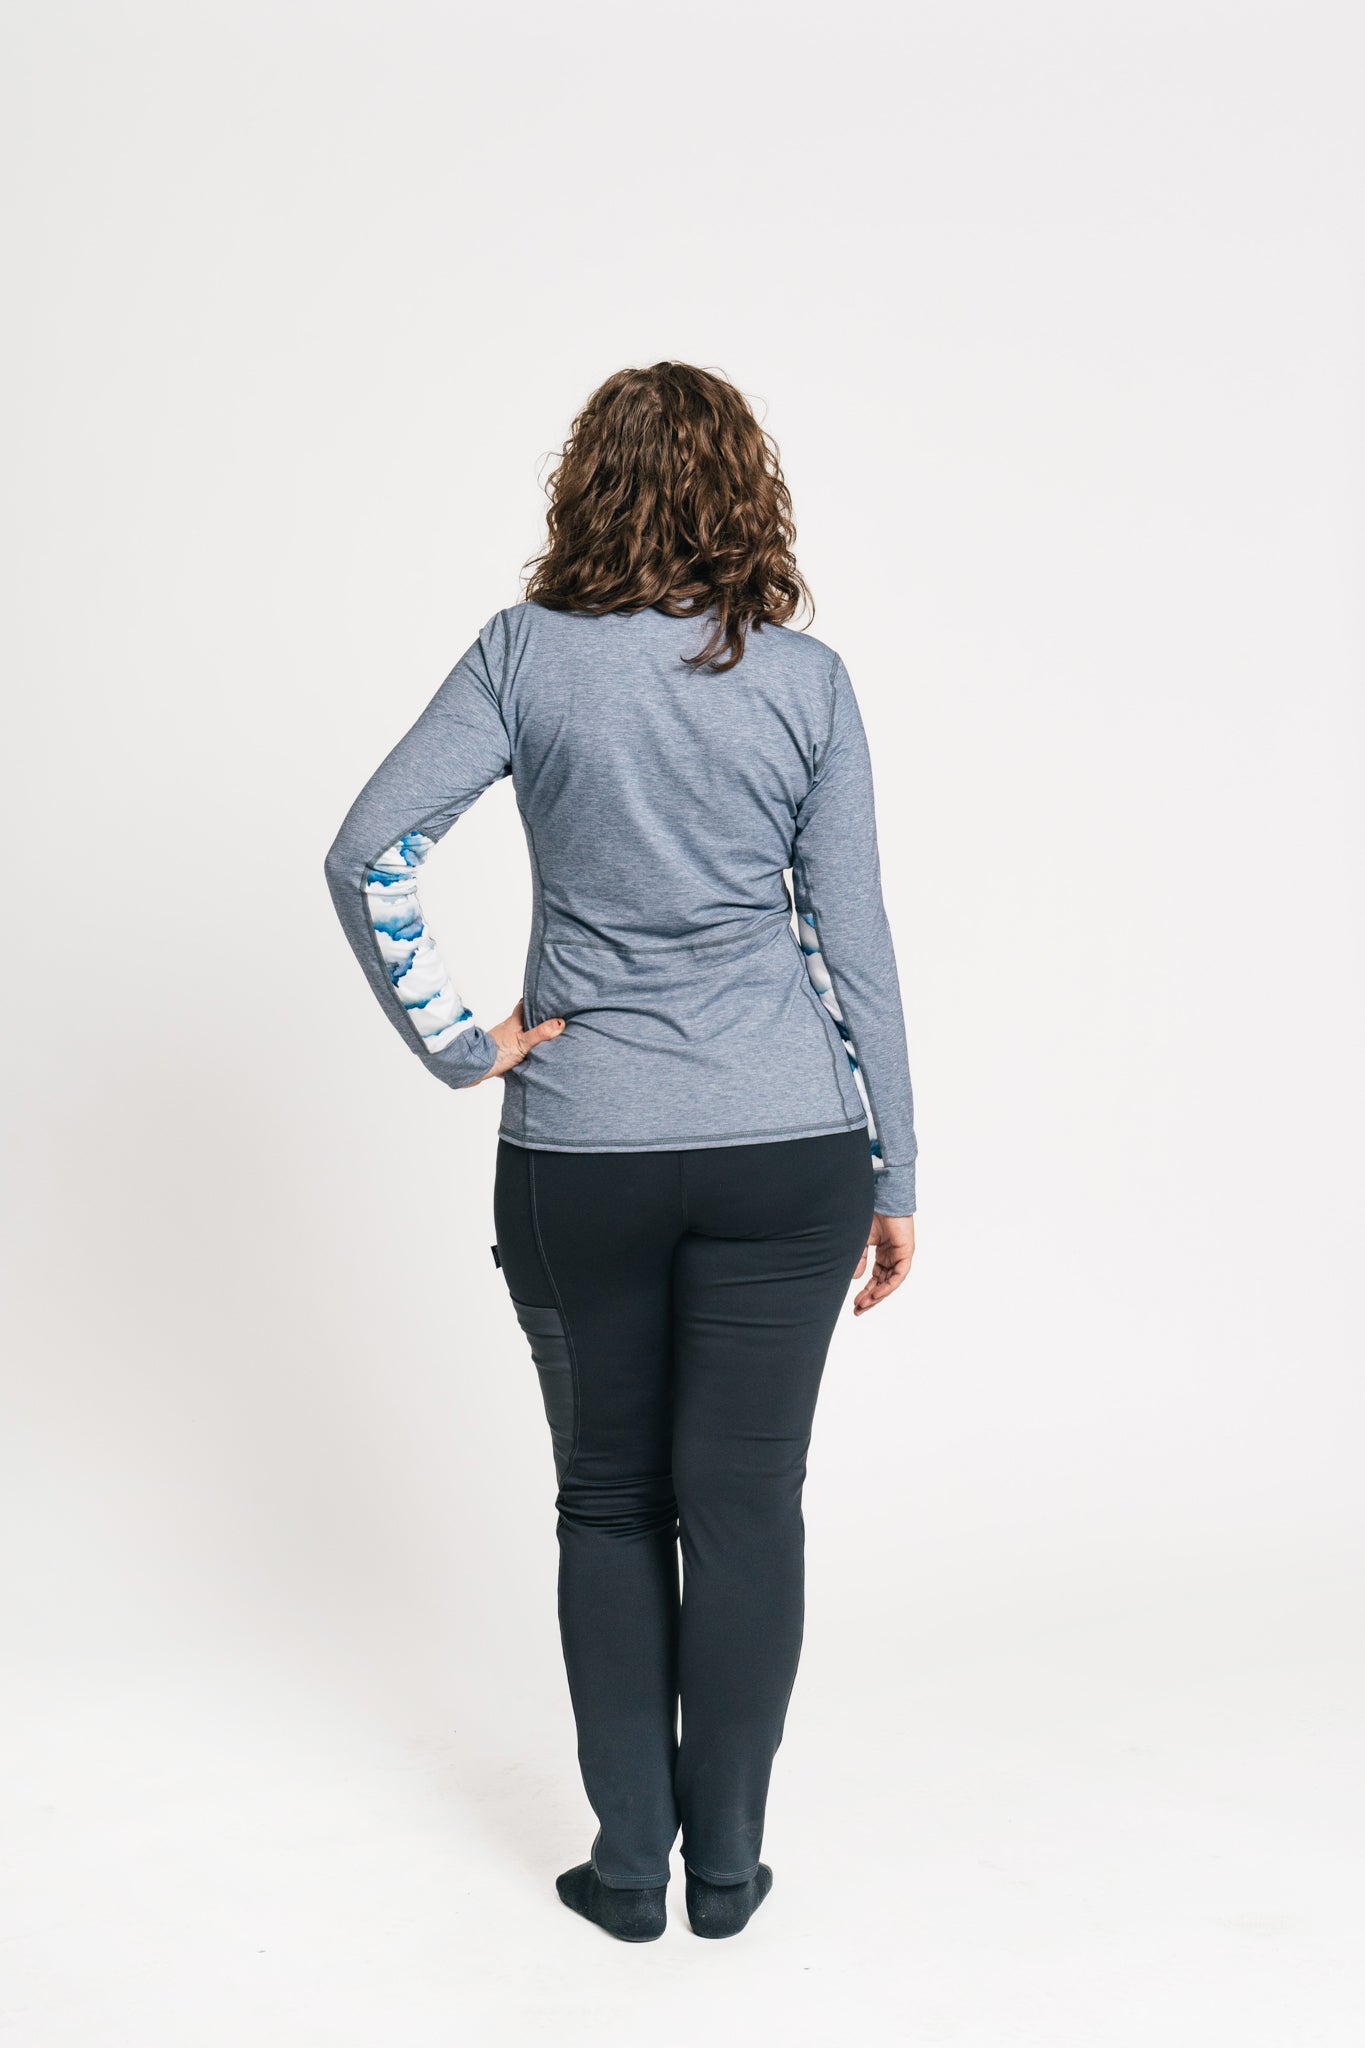 alpine fit hiking leggings on model from behind